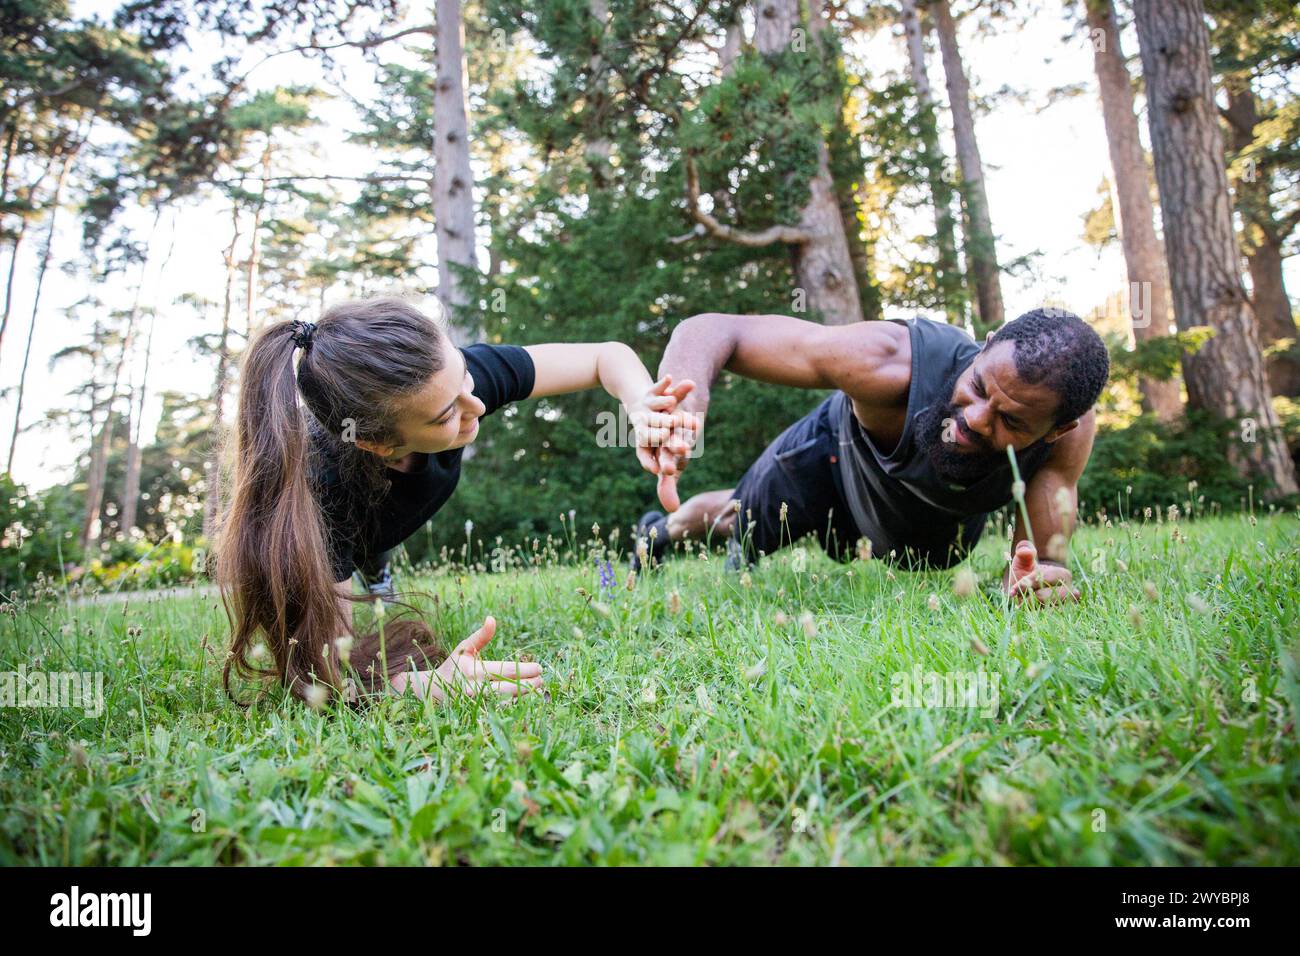 A man and a woman are doing a plank exercise on a grassy field. The man is wearing a black shirt and the woman is wearing a black shirt Stock Photo